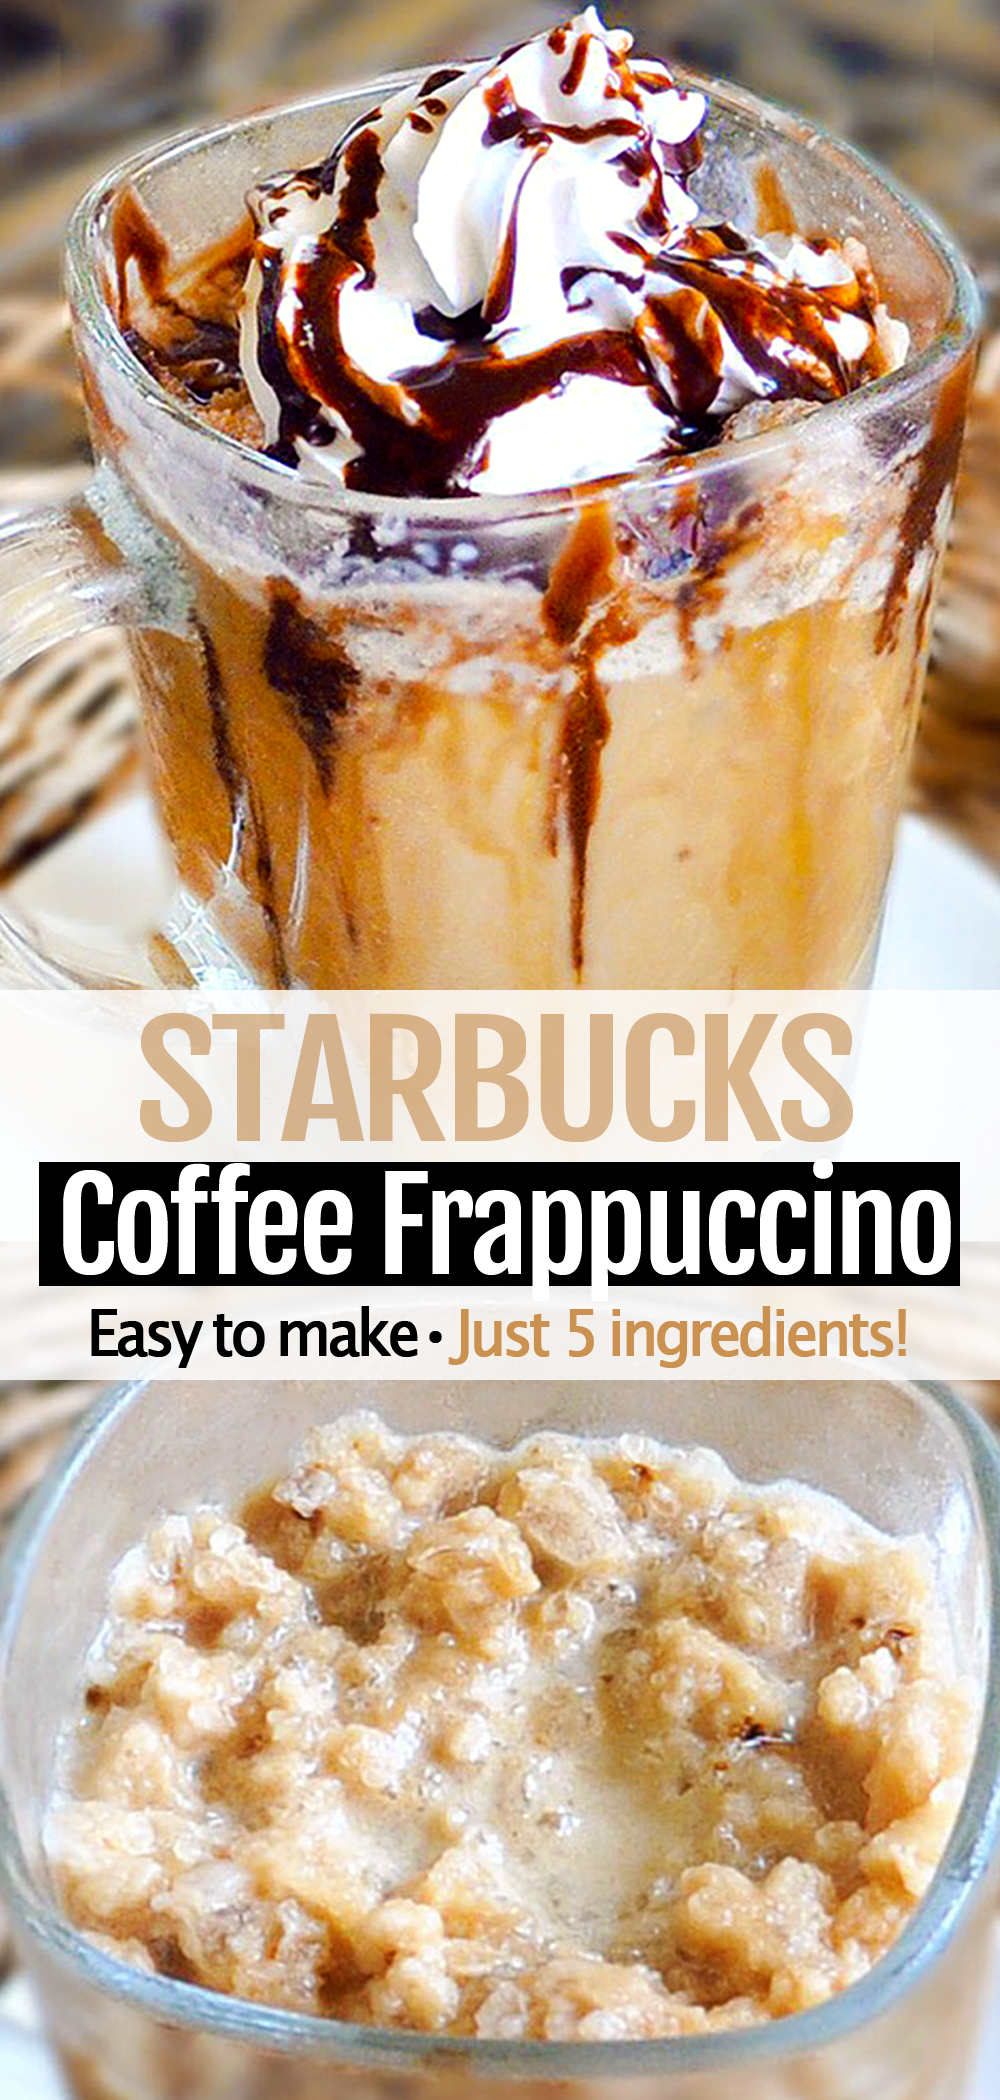 https://chocolatecoveredkatie.com/wp-content/uploads/2019/07/Easy-5-Ingredient-Homemade-Starbucks-Frappuccino-Recipe.png